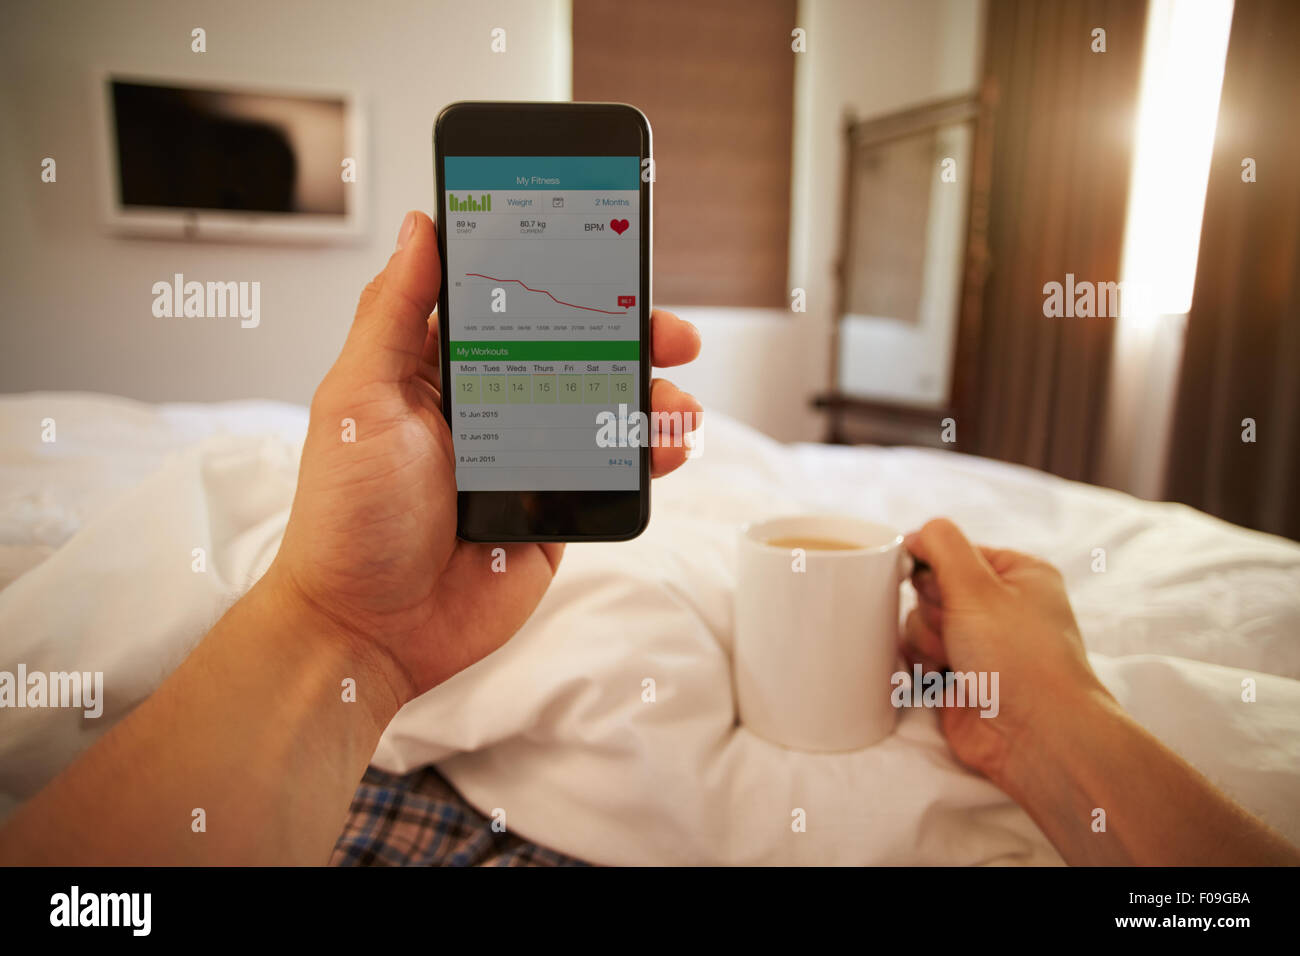 Man In Bed Looking At Health Monitoring App On Mobile Phone Stock Photo